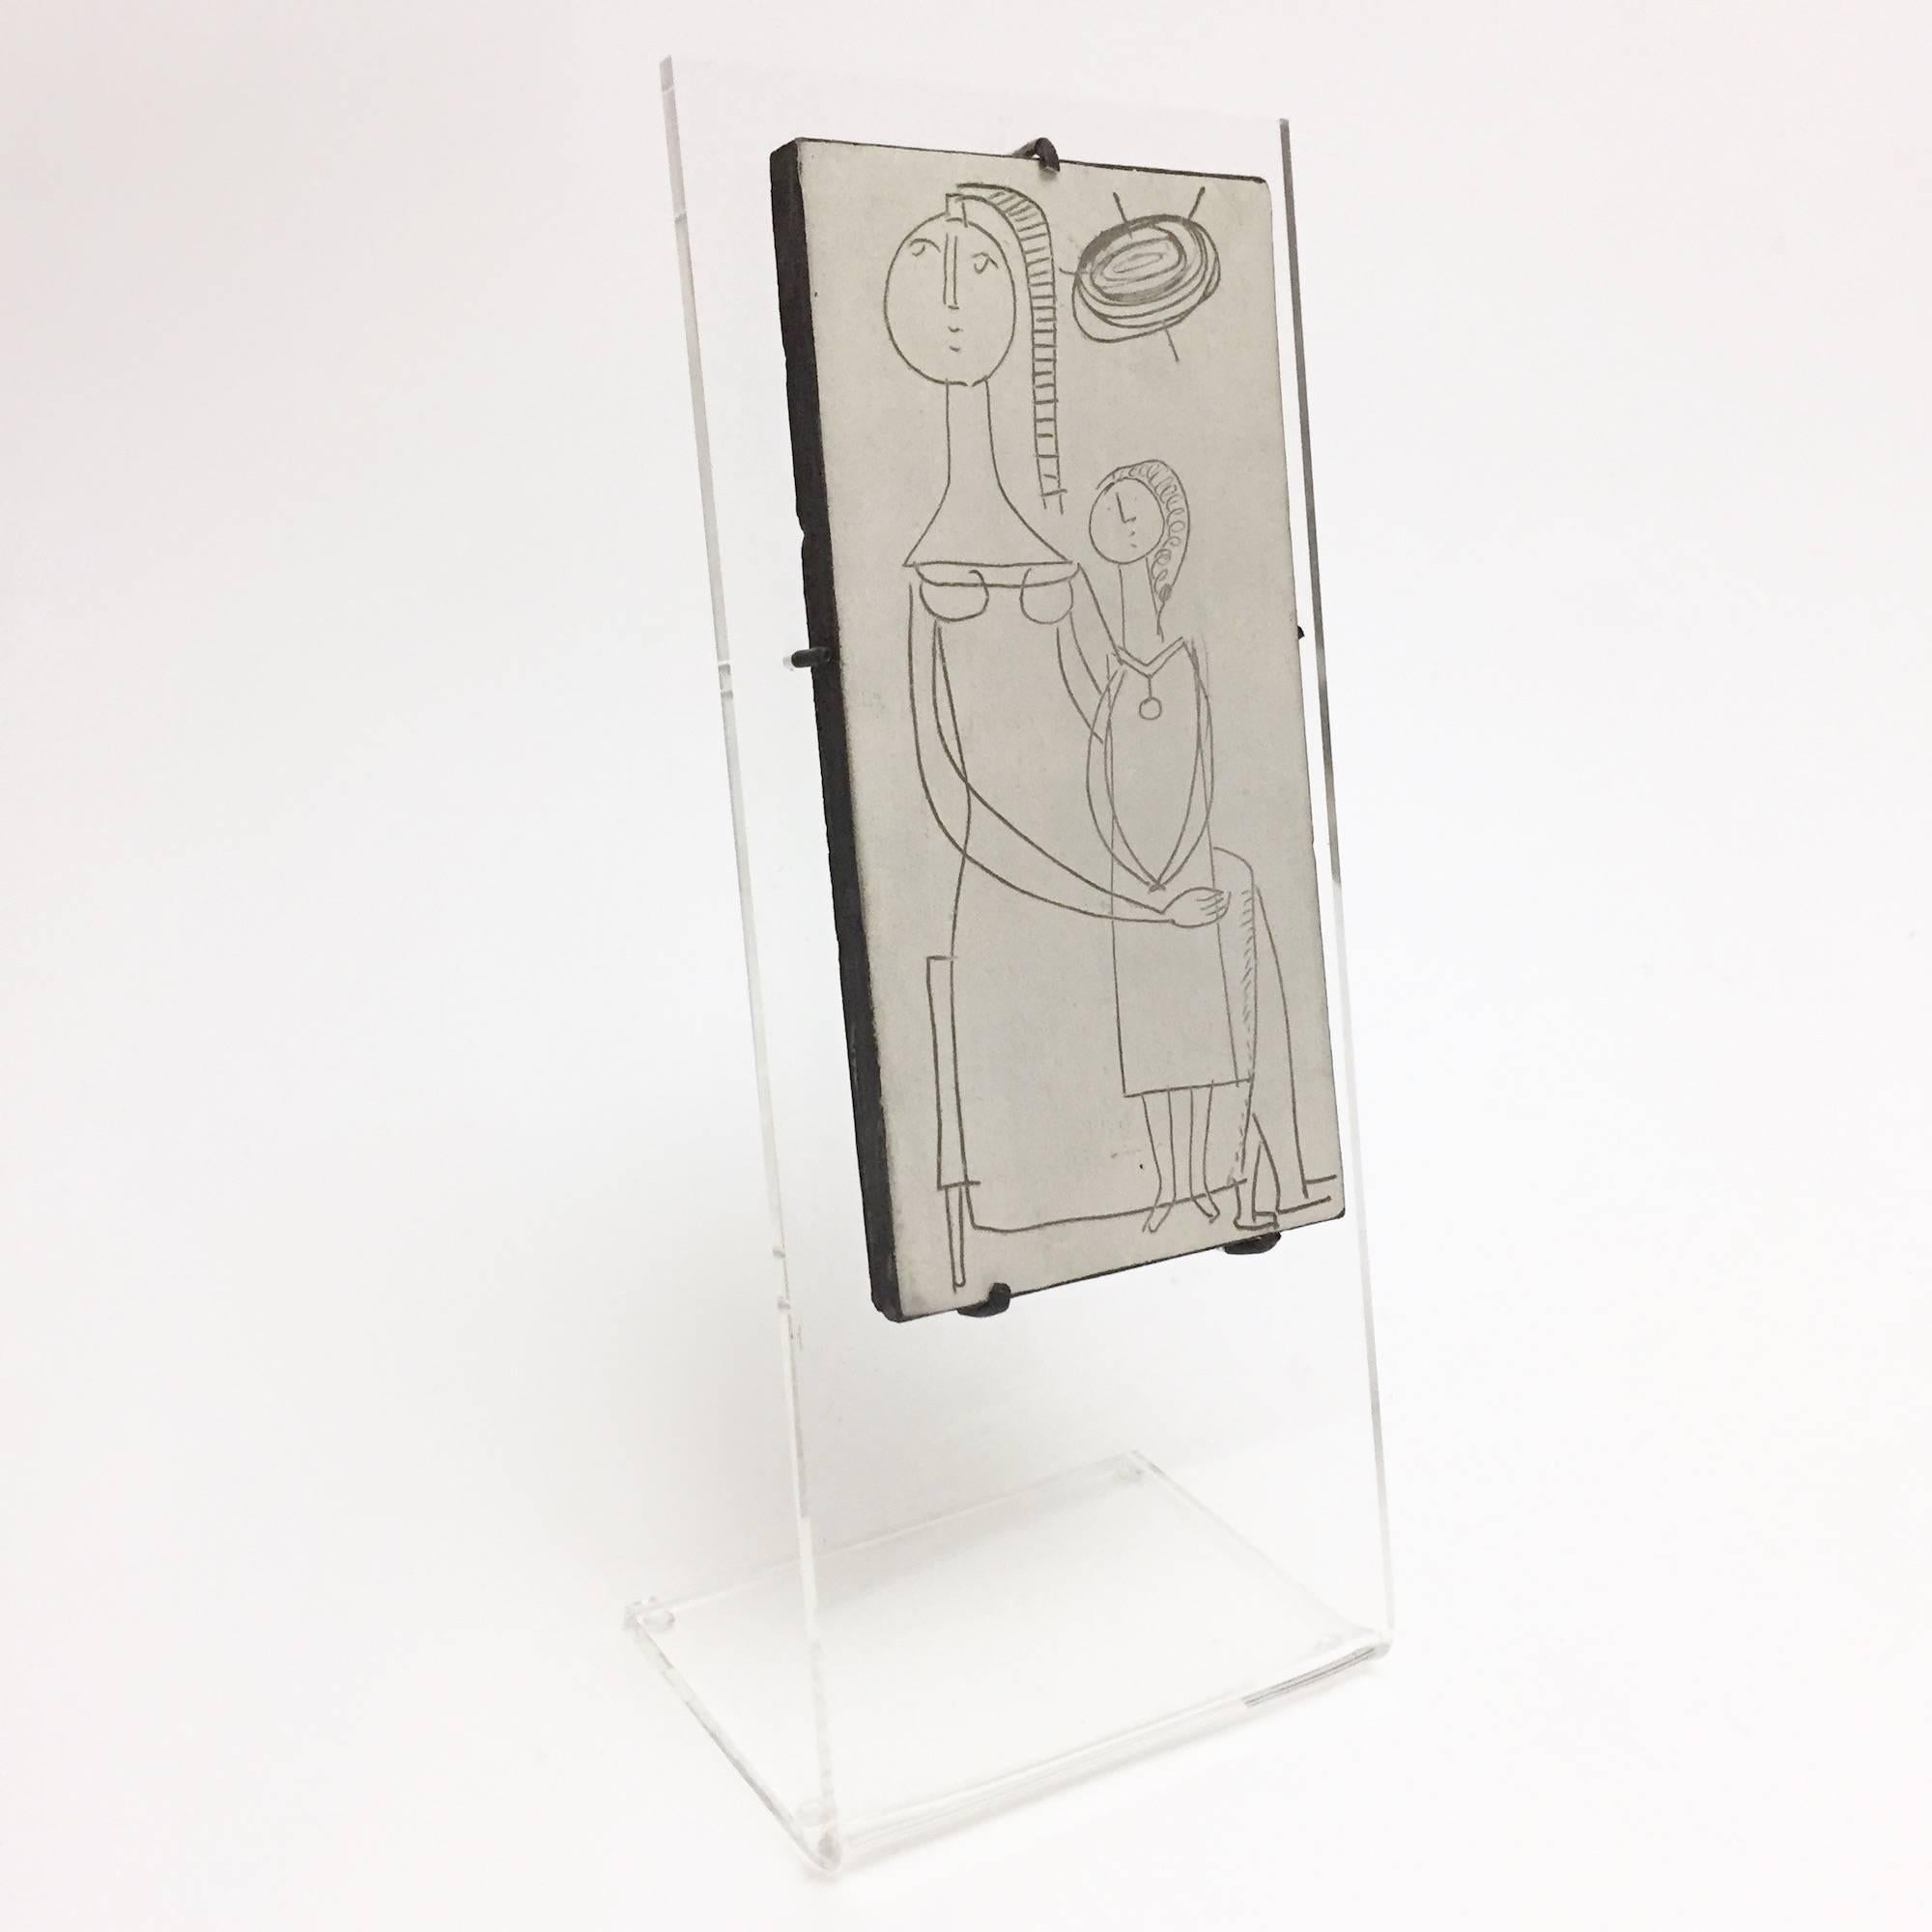 Vallauris red clay tile, glazed in pale grey/beige and black ground decorated with figurative designs engraved. 
The additional and removable clear plexiglass base has been made to measure (contemporary).

The ceramic tile is signed back